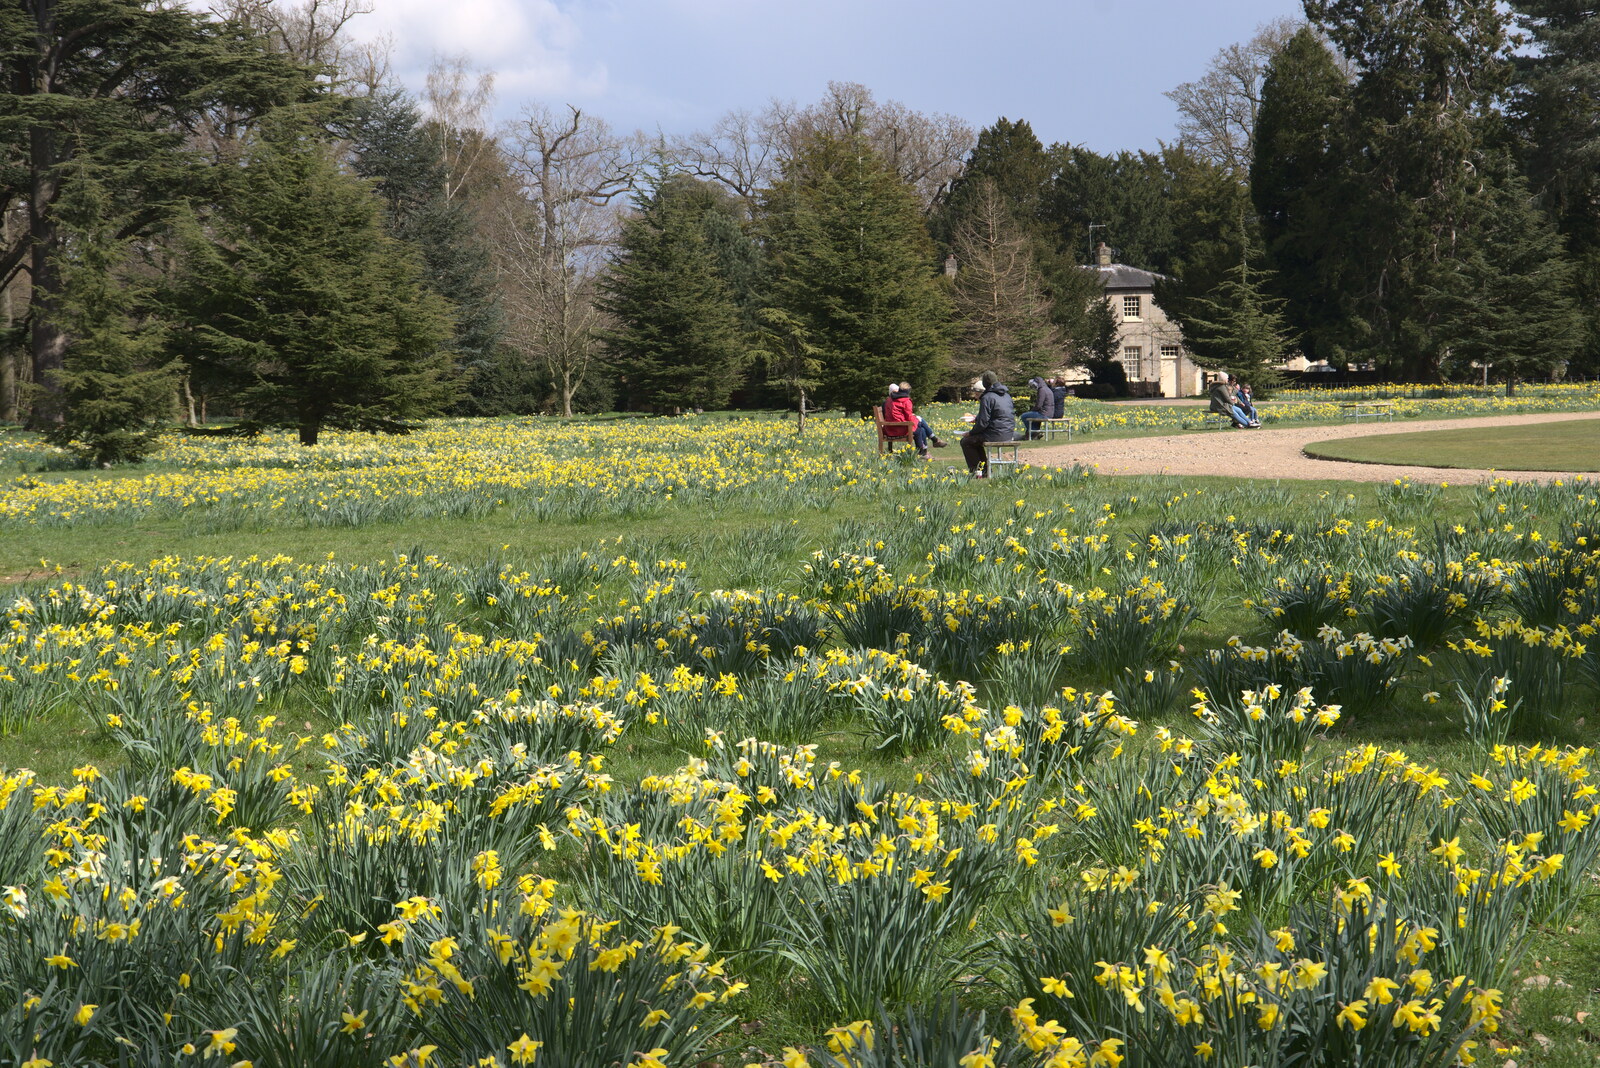 A field of daffodils from A Return to Ickworth House, Horringer, Suffolk - 11th April 2021